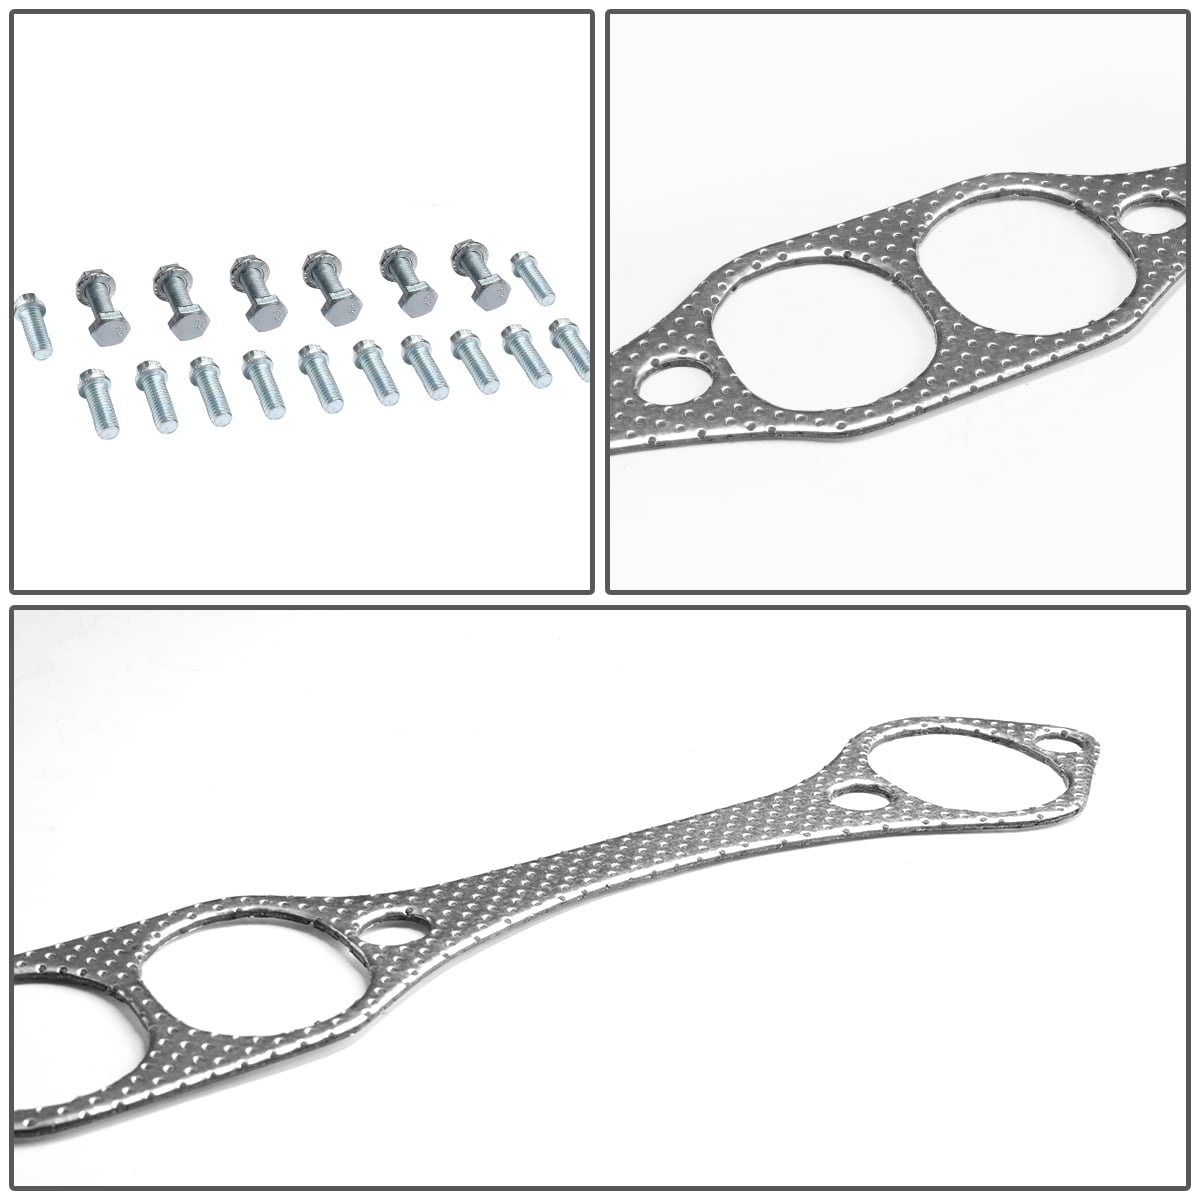 Aluminum Exhaust Manifold Header Gasket Set for Chevy SBC Small Block V8 Engine 283 305 327 350 400 